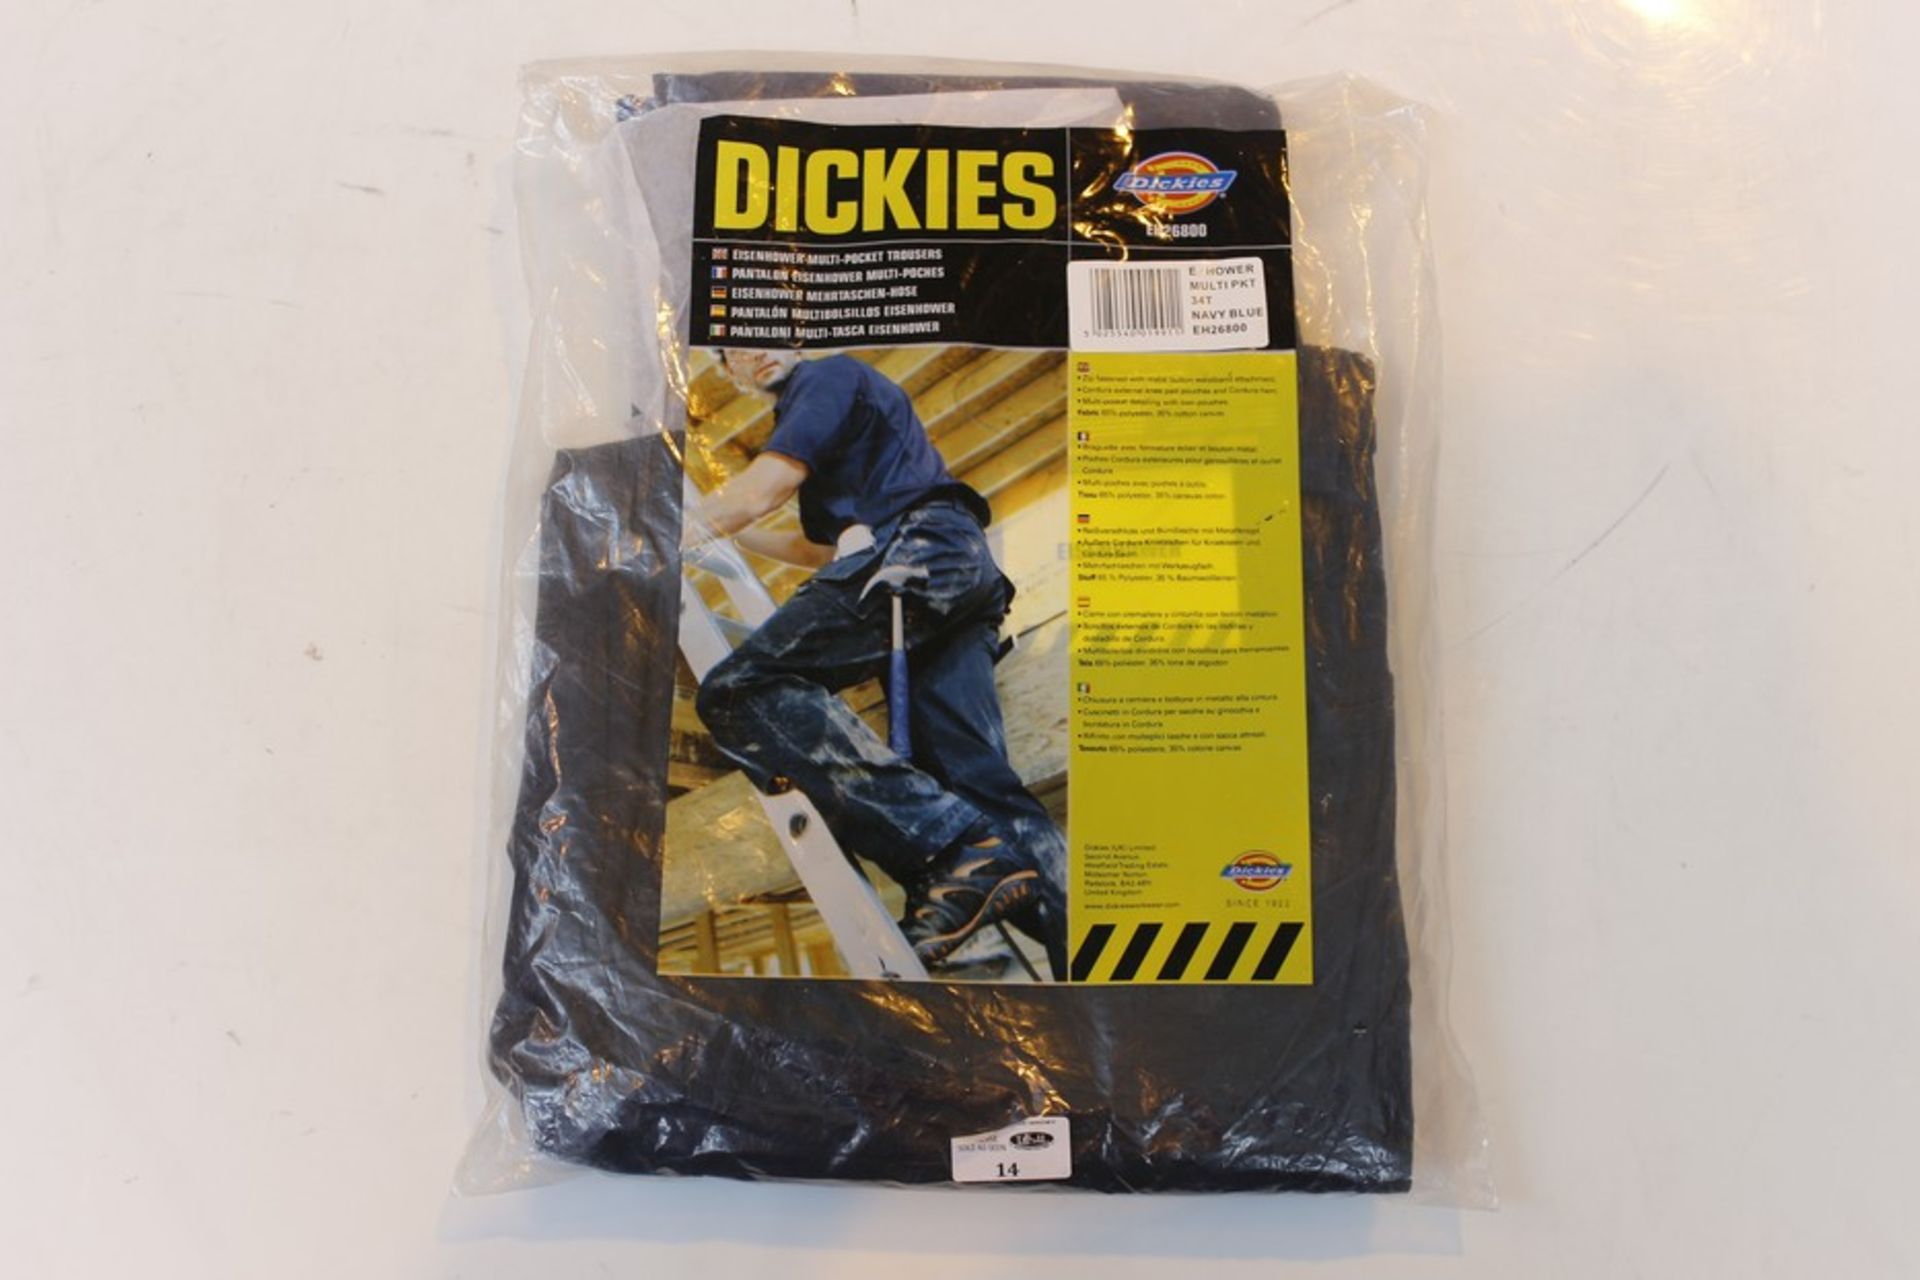 2 x PAIRS OF DICKIES WORK TROUSERS  *PLEASE NOTE THAT THE BID PRICE IS MULTIPLIED BY THE NUMBER OF